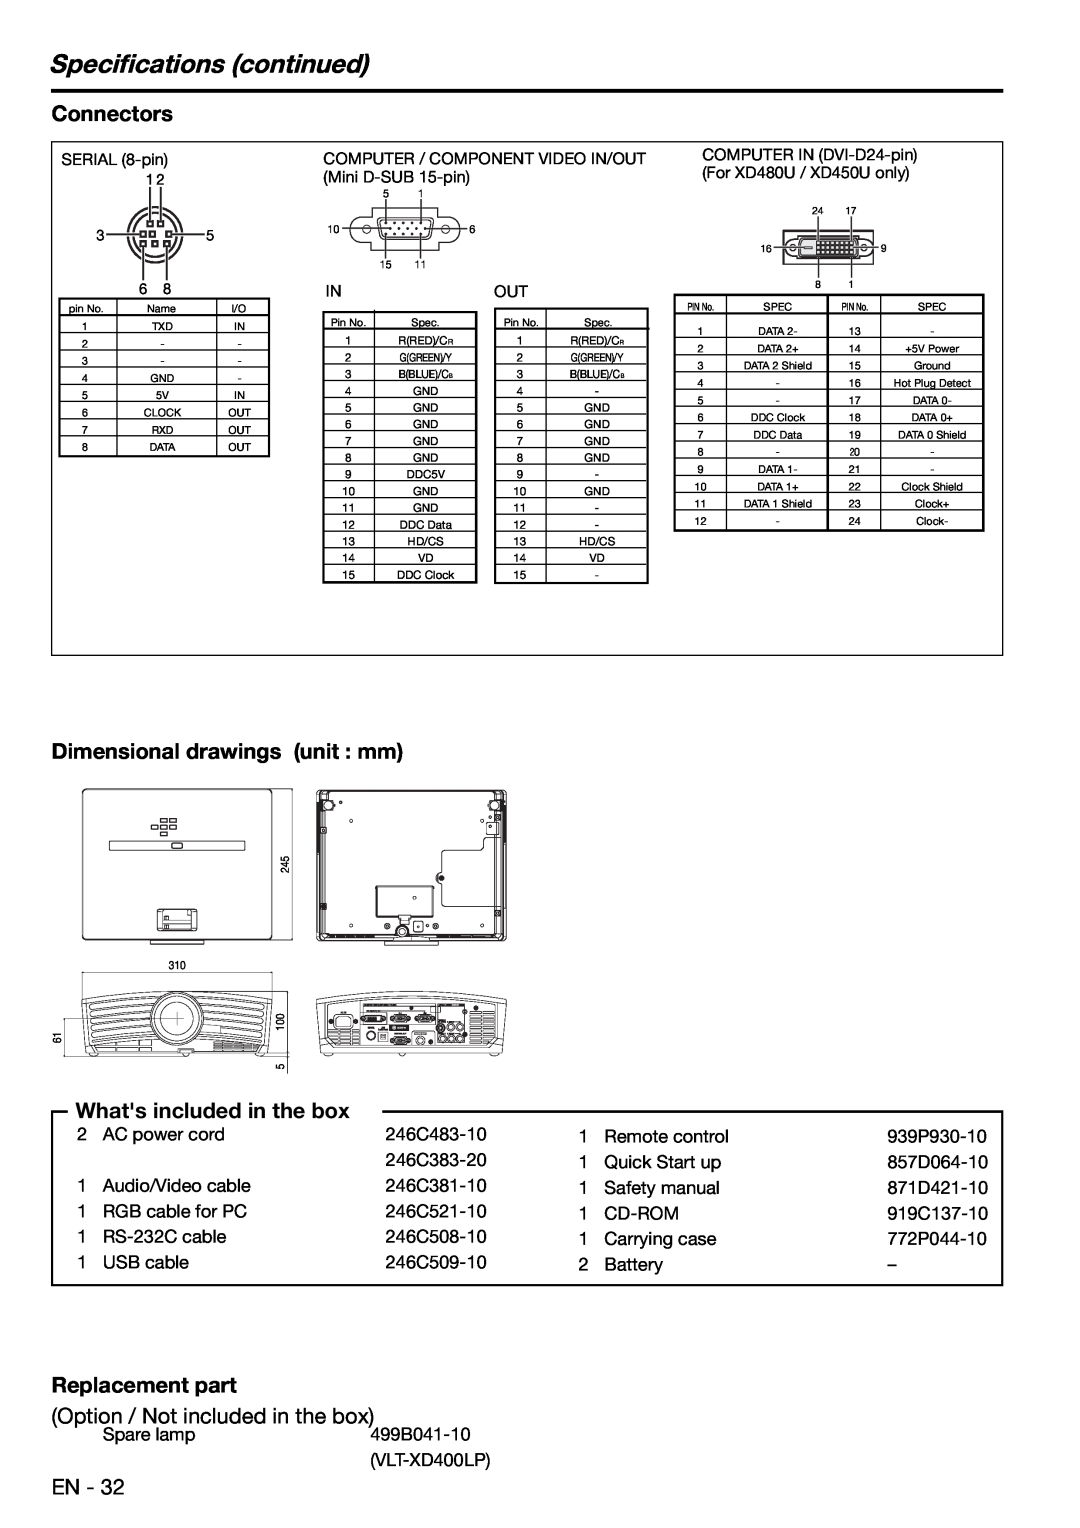 Mitsubishi Electronics XD480U Speciﬁcations continued, Connectors, Dimensional drawings unit mm, Whats included in the box 